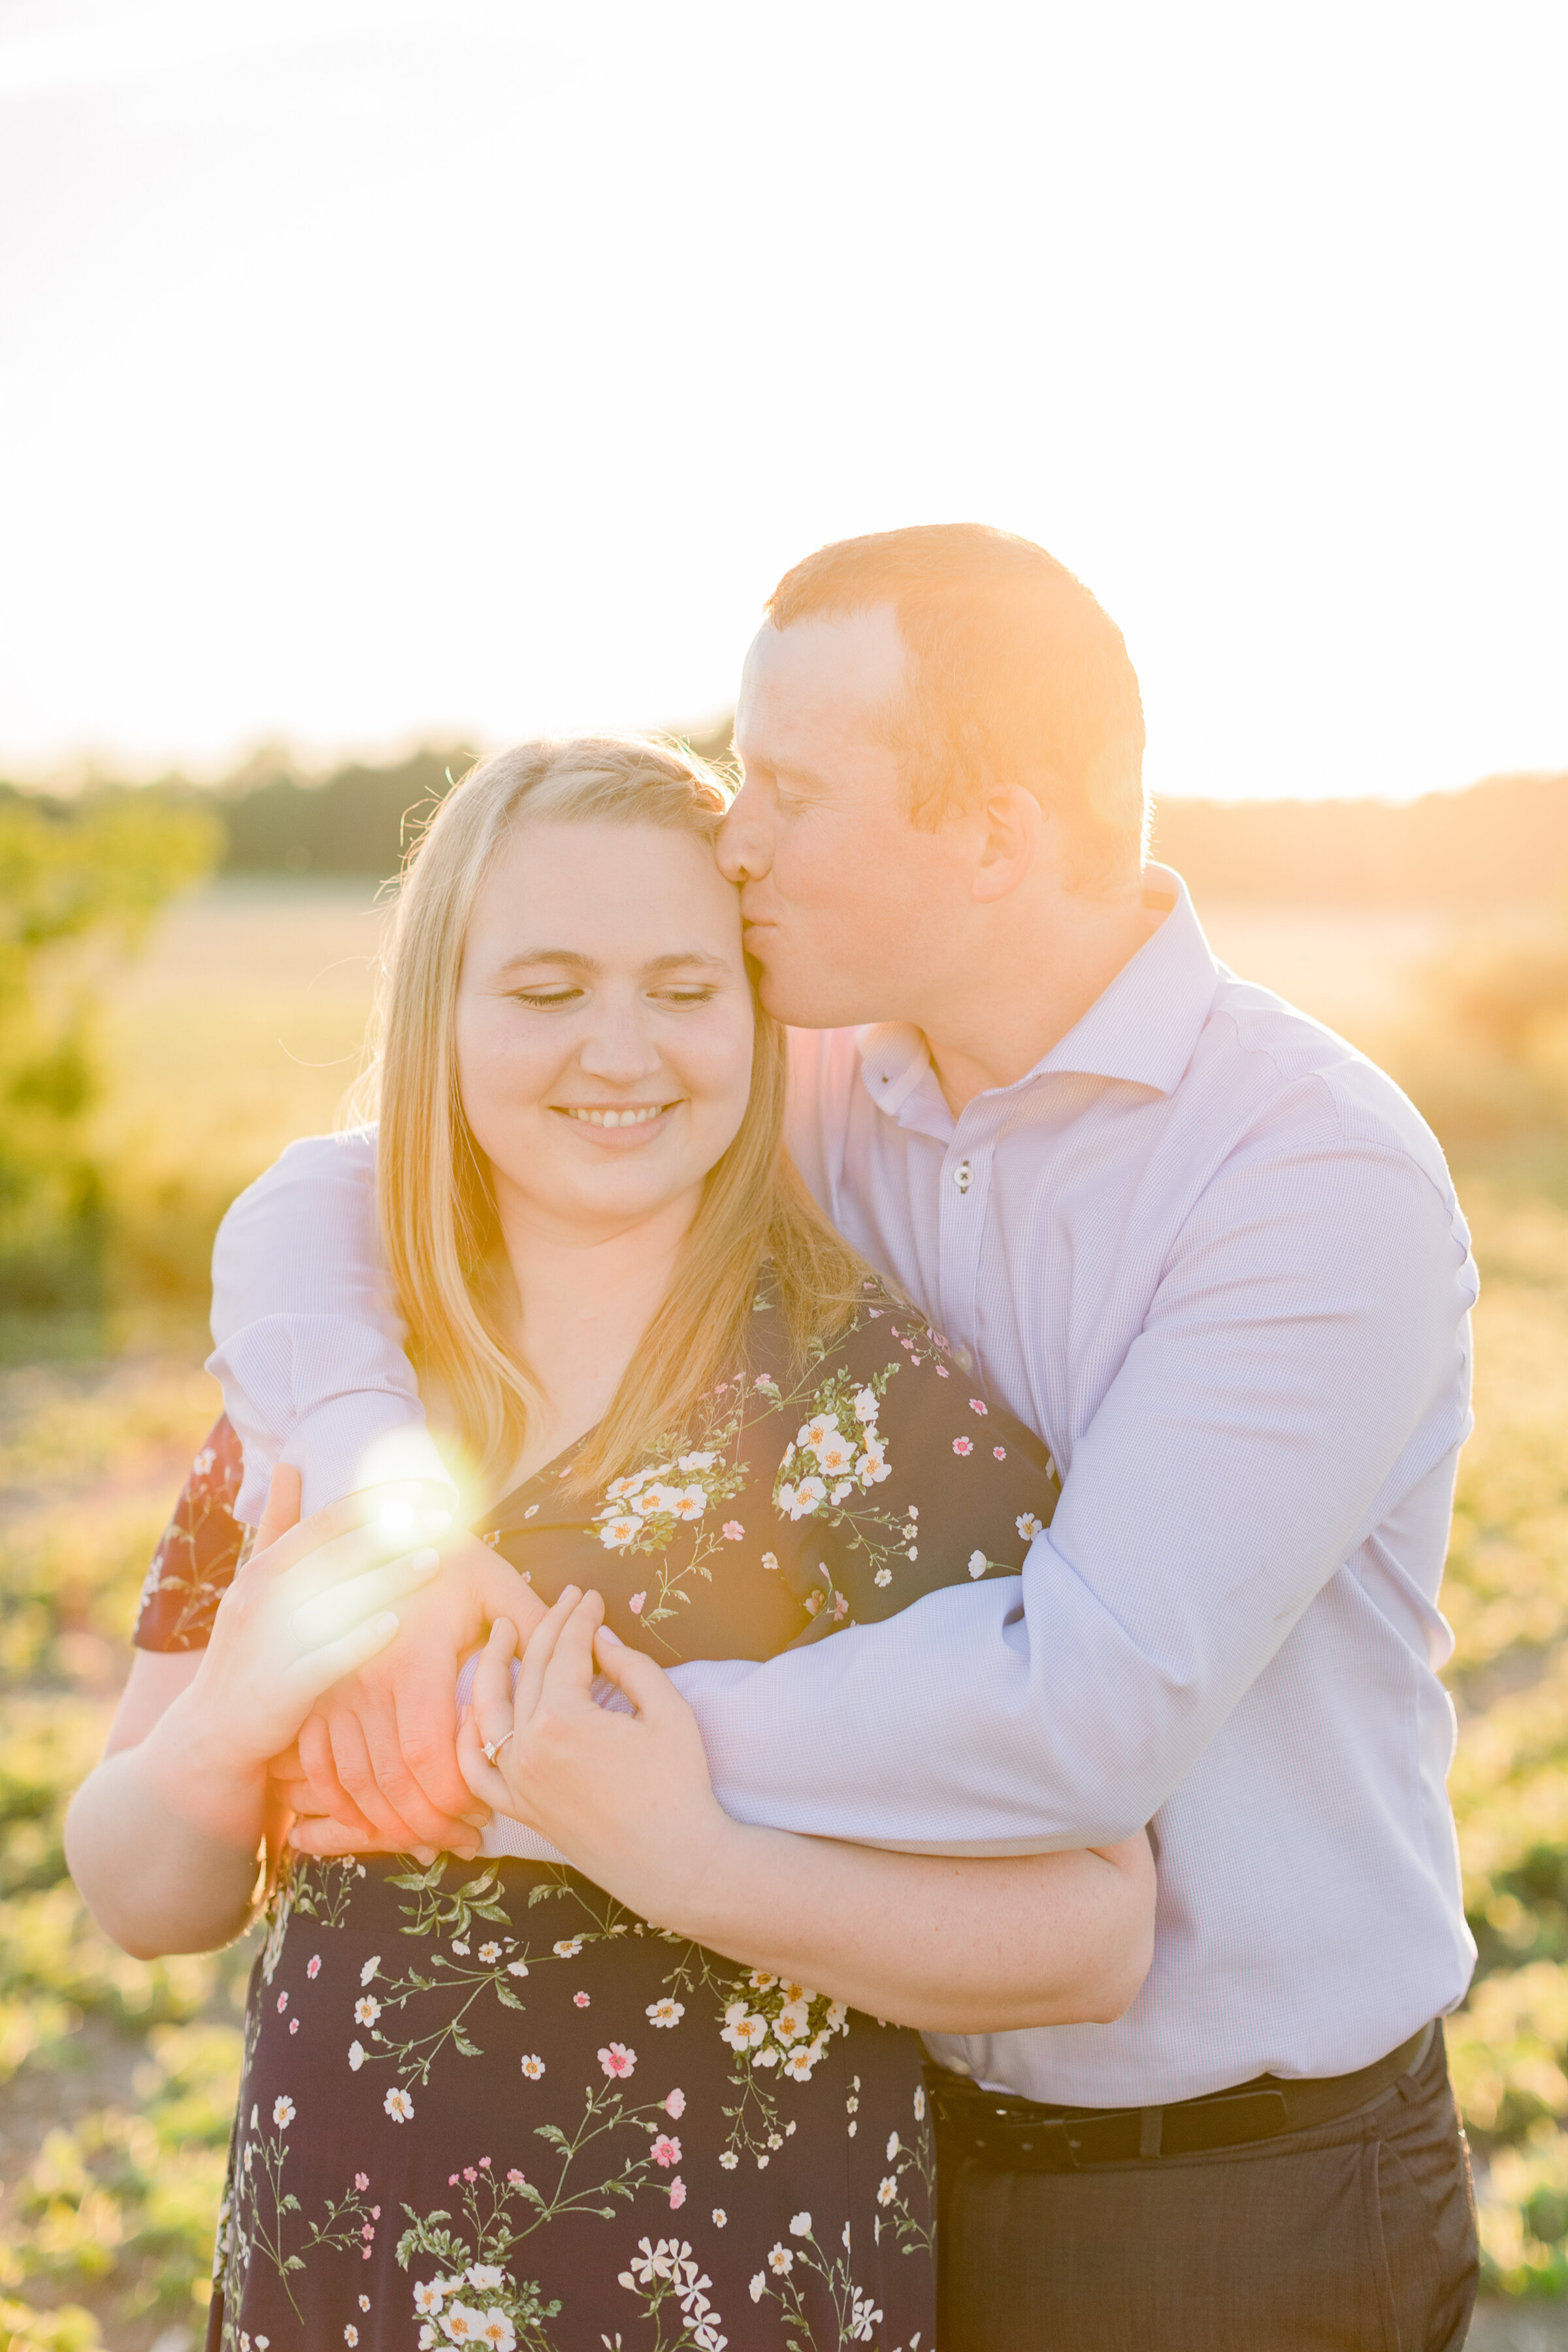  The groom kisses his soon to be wife’s head in a bright and beautiful engagement session on the farm. Engagement session inspiration couple pose inspiration couple goals photography goals outdoor session inspiration  semi formal client attire inspir